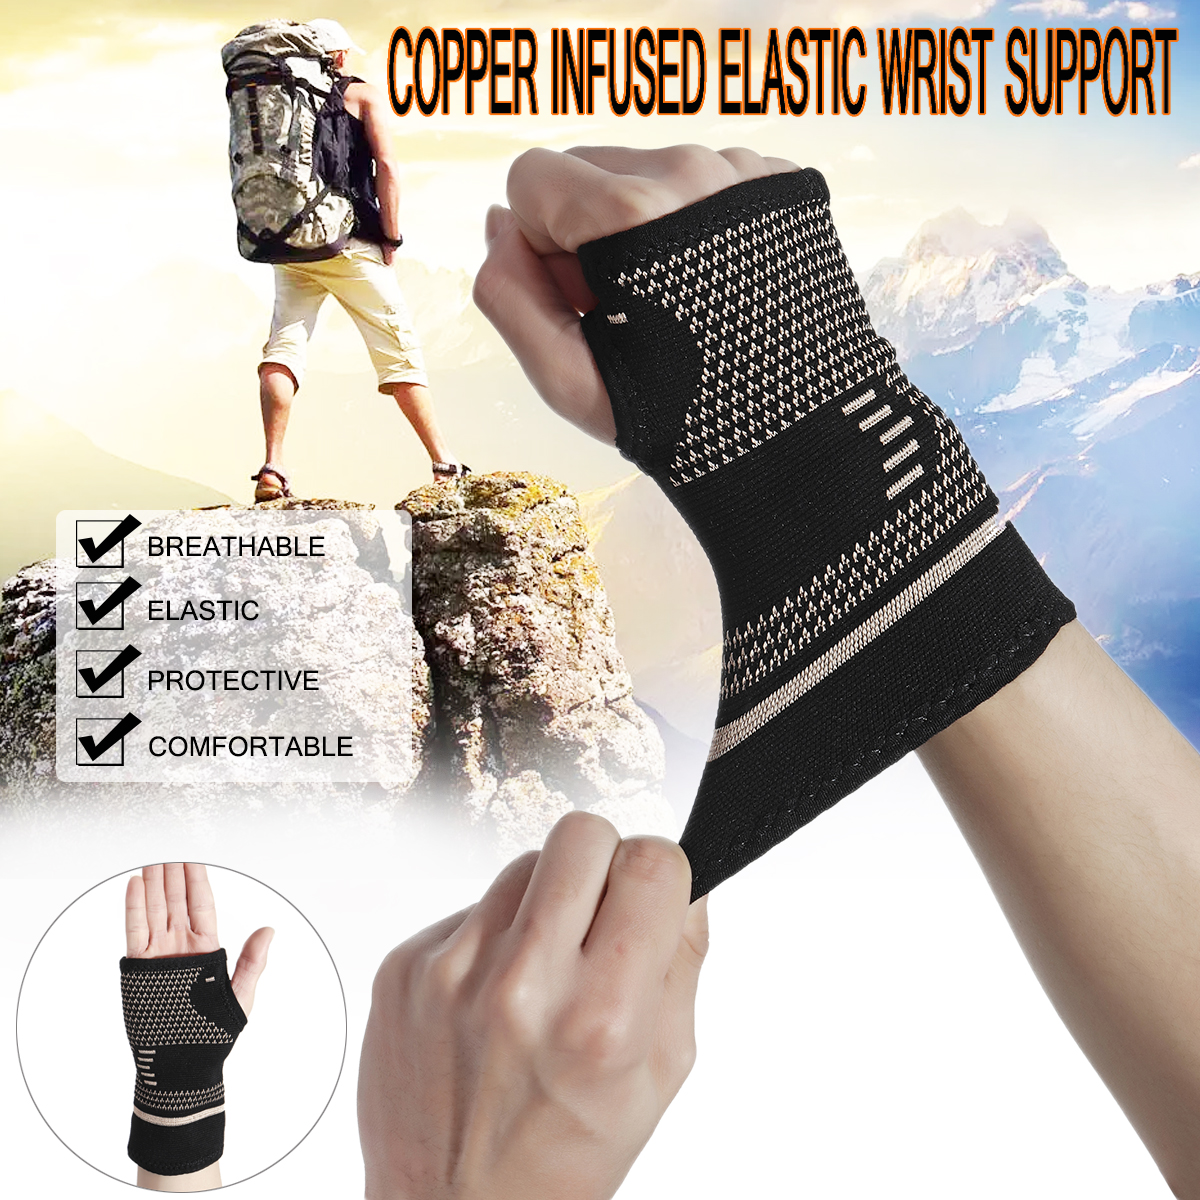 KALOAD-1PC-Copper-Infused-Wrist-Sleeve-Palm-Hand-Support-Outdoor-Sports-Bracer-Support-Fitness-Prote-1429972-2